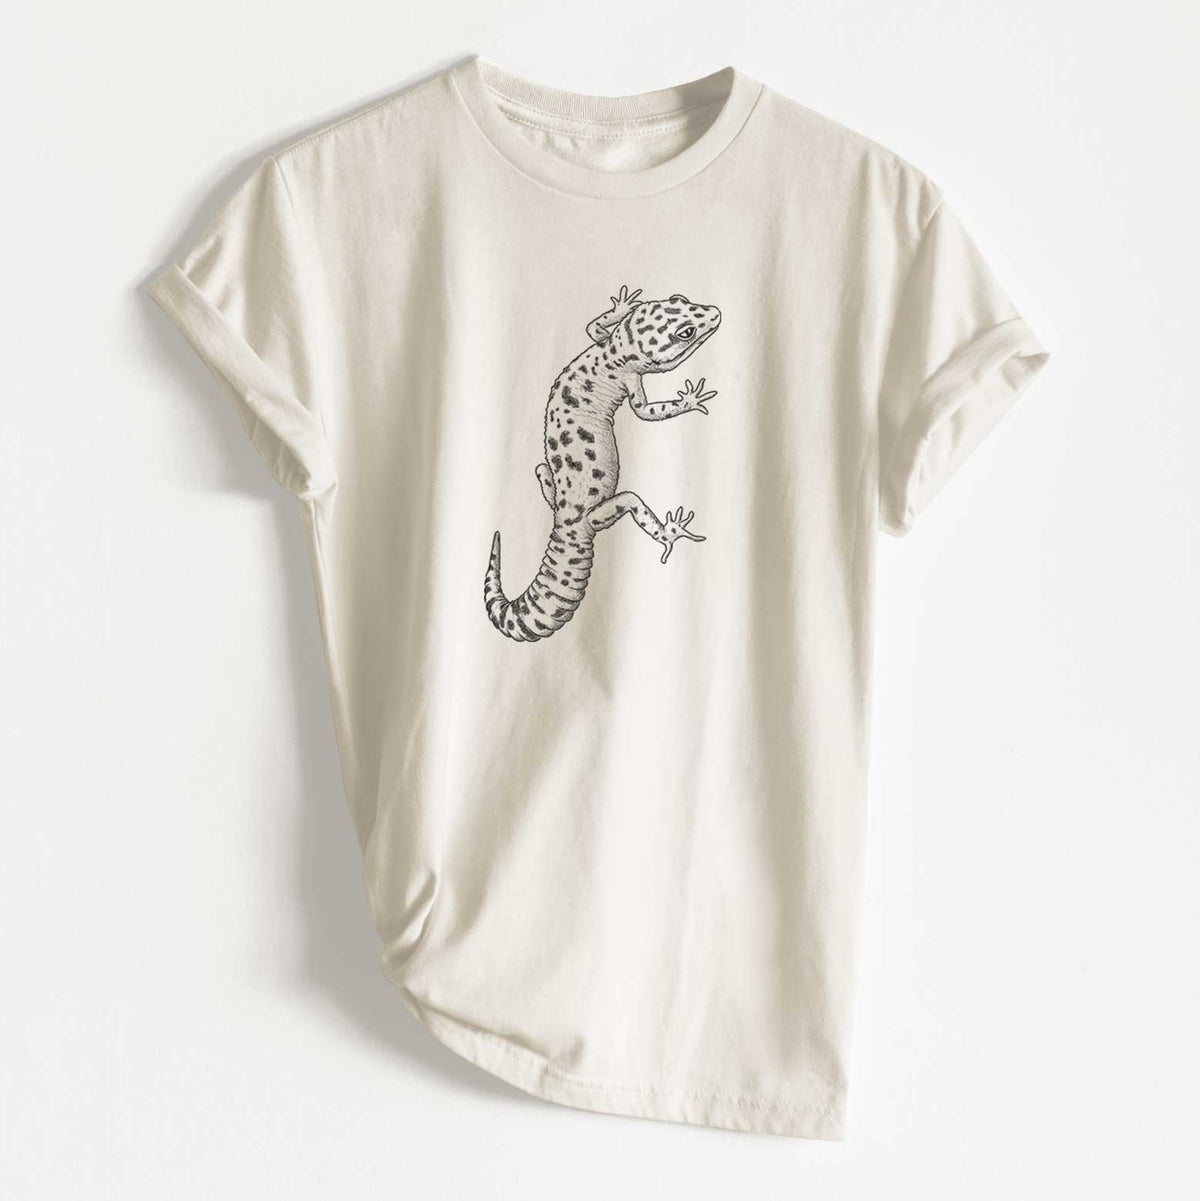 Eublepharis macularius - Leopard Gecko - Unisex Recycled Eco Tee  - CLOSEOUT - FINAL SALE